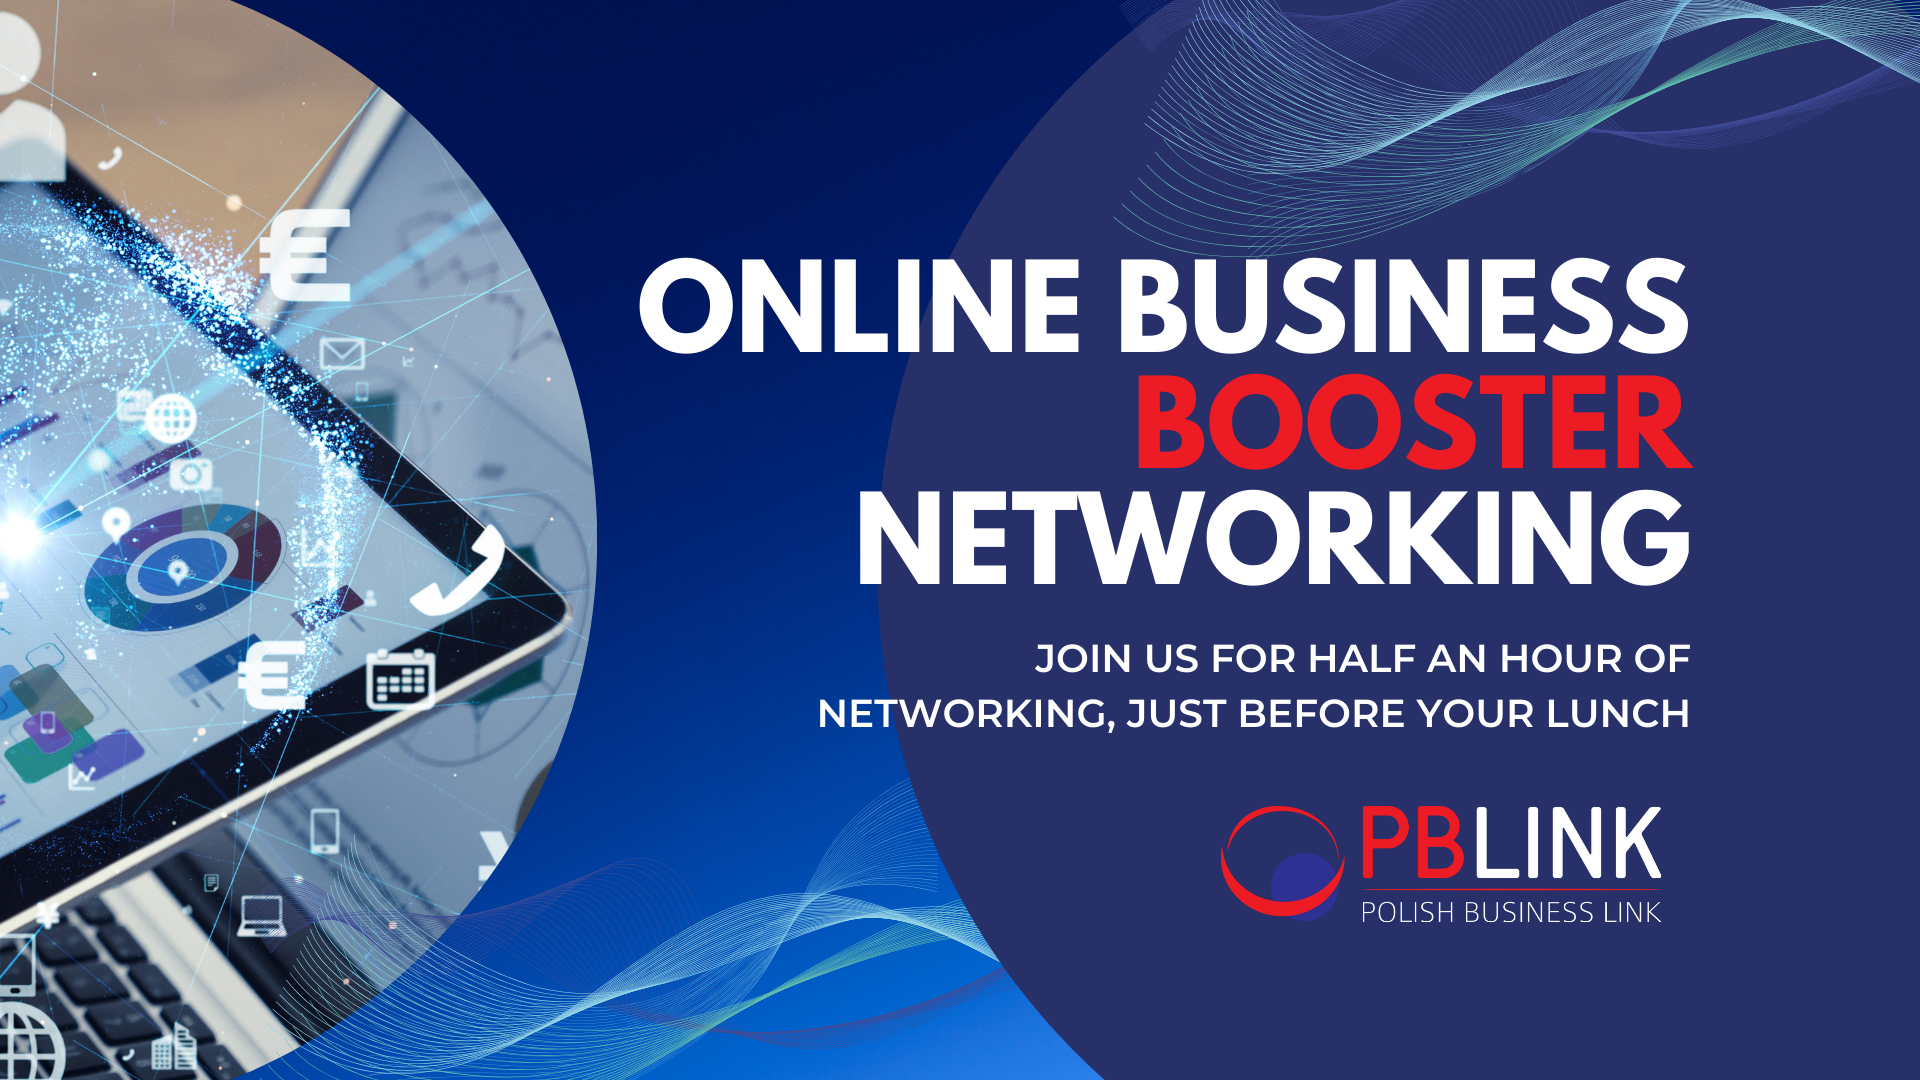 PBLINK Online Business Booster Networking 23